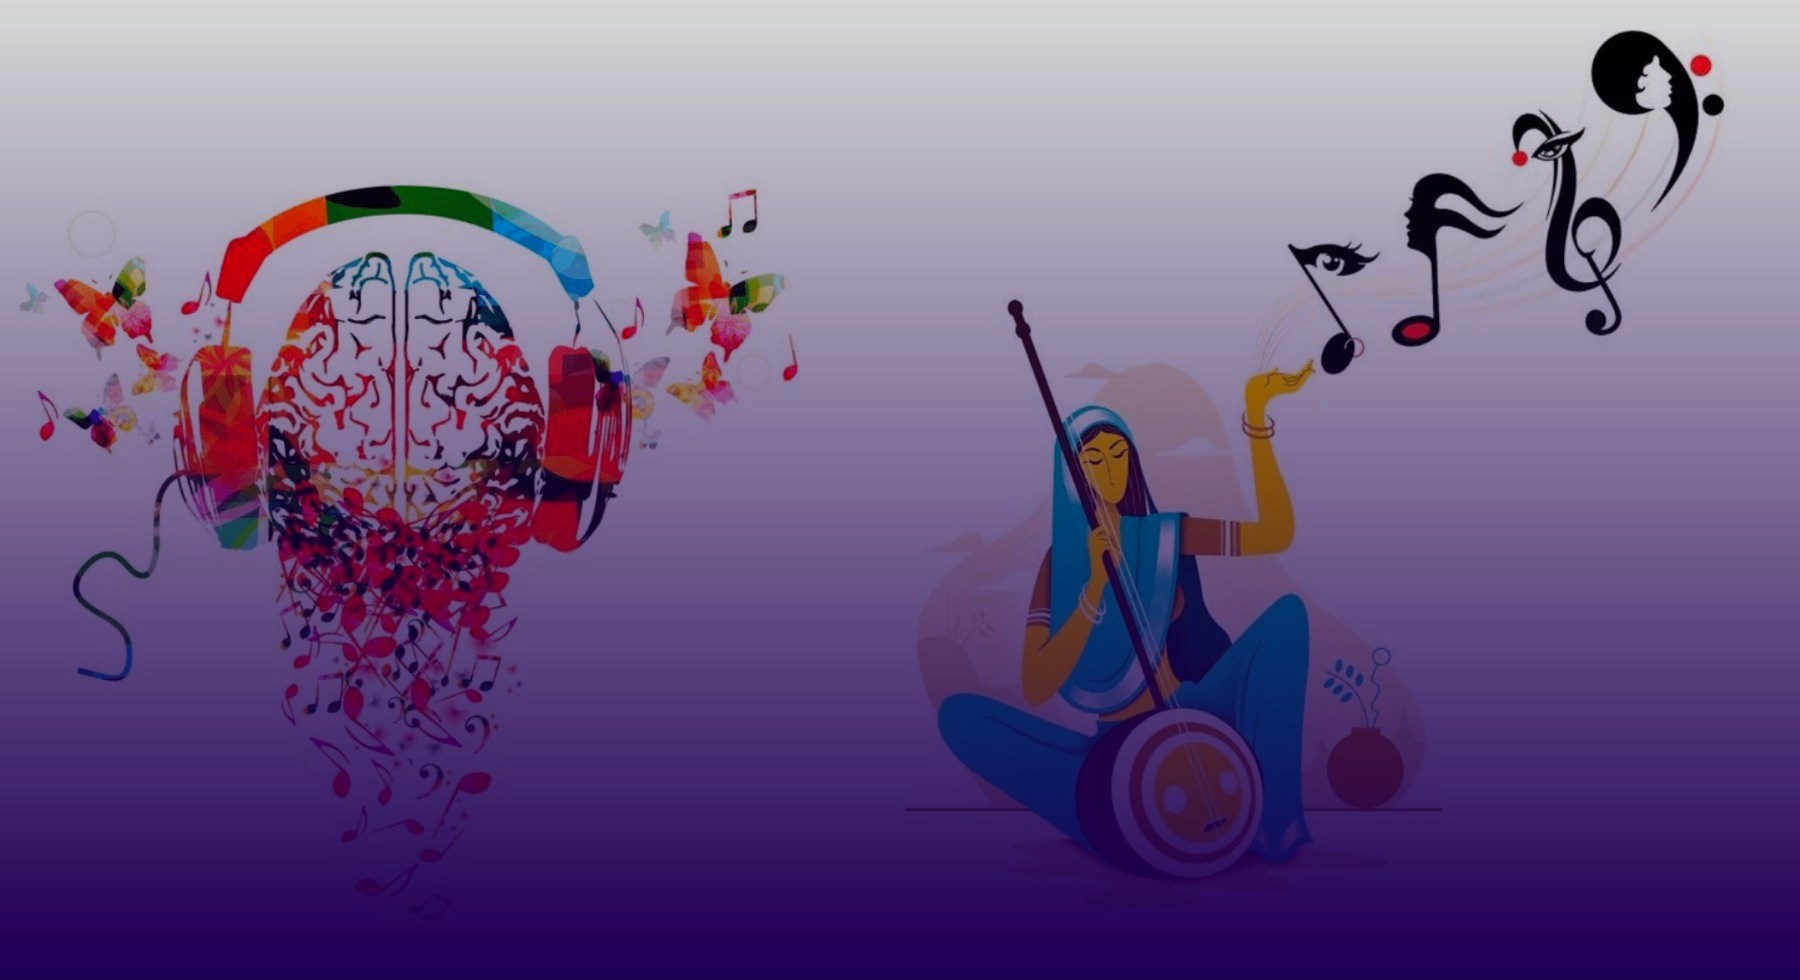 Cognitive Development Through The Ragas of Indian Classical Music